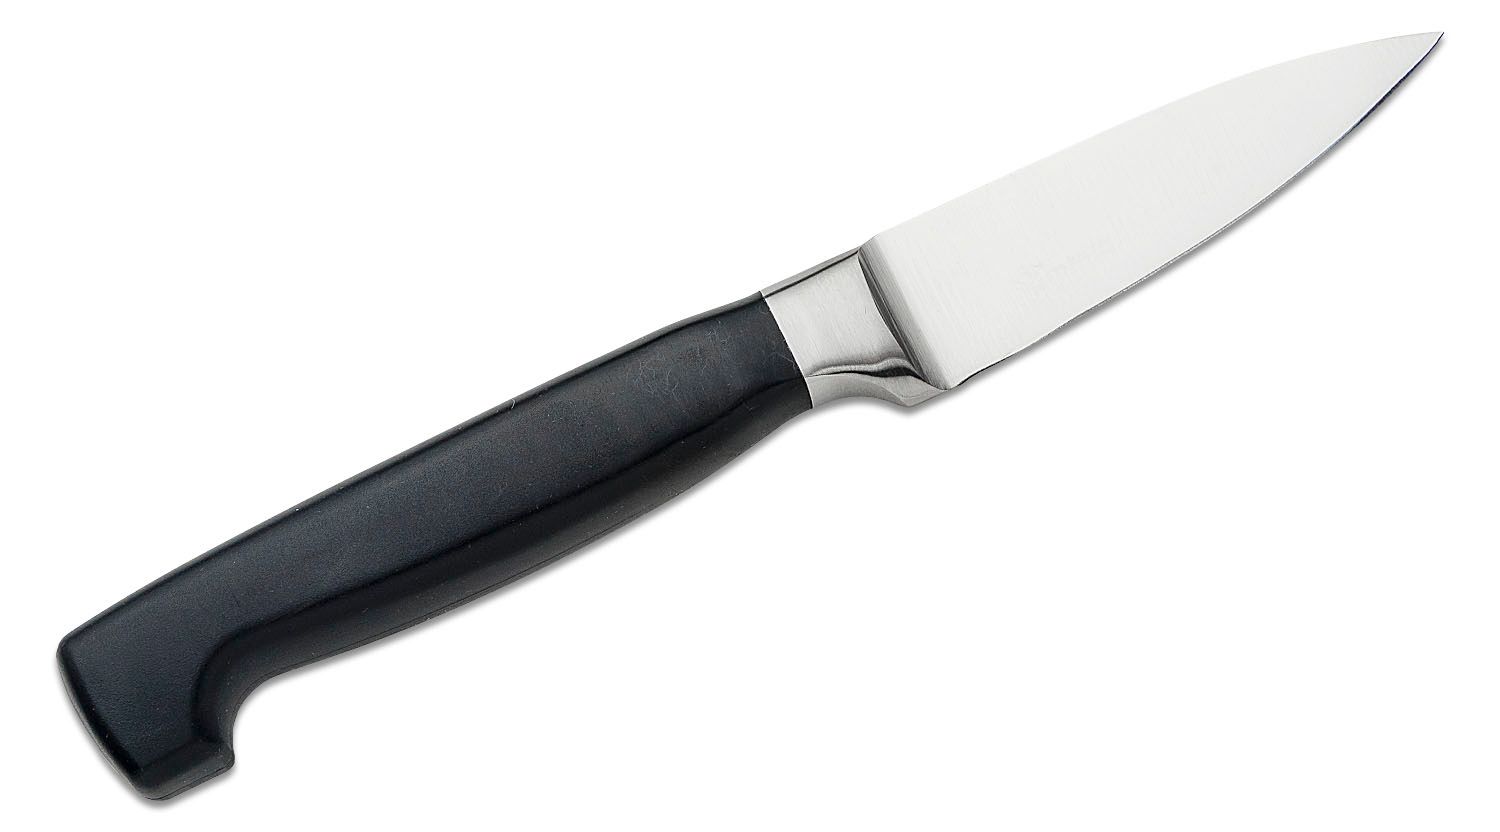 Zwilling J.A. Henckels TWIN Four Star 3 inch Paring Knife